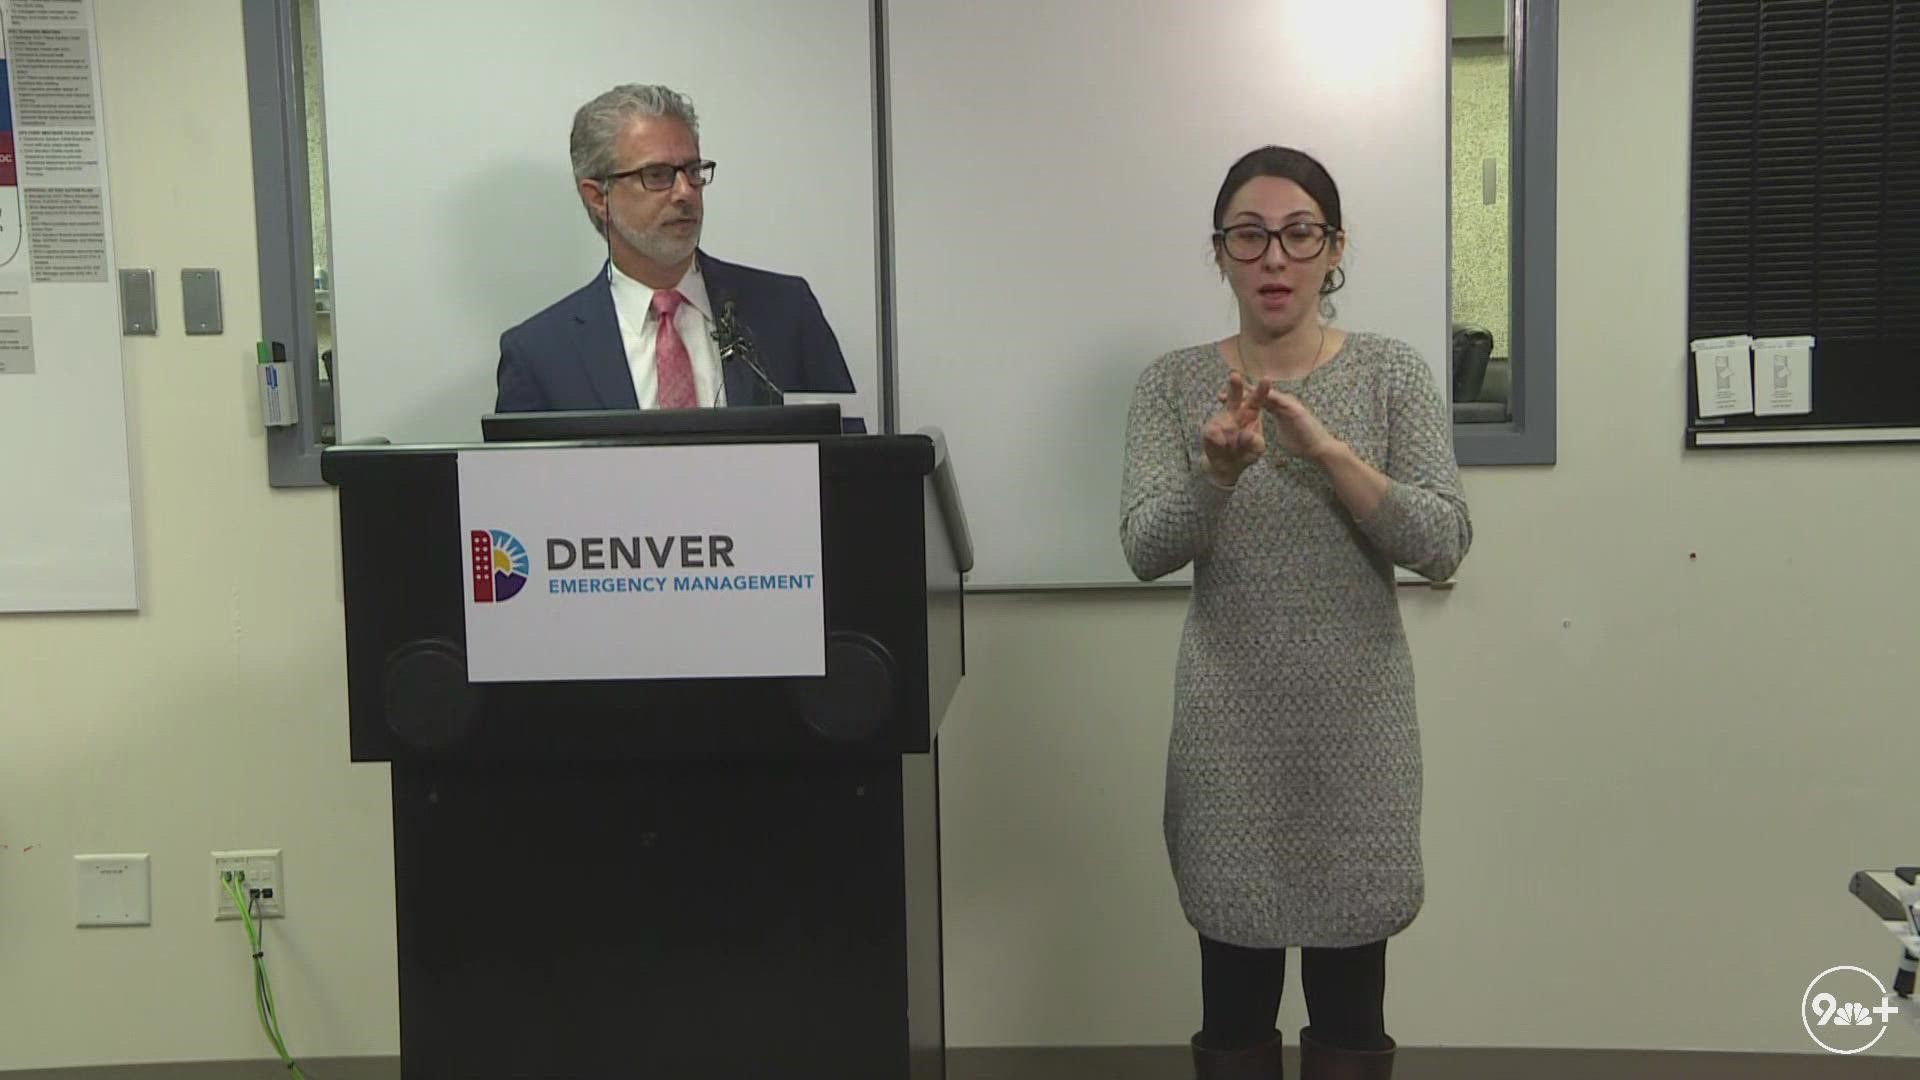 Emergency Operations leadership provided an update on sheltering efforts to assist migrants, and how Denver is working to ensure basic needs are met.